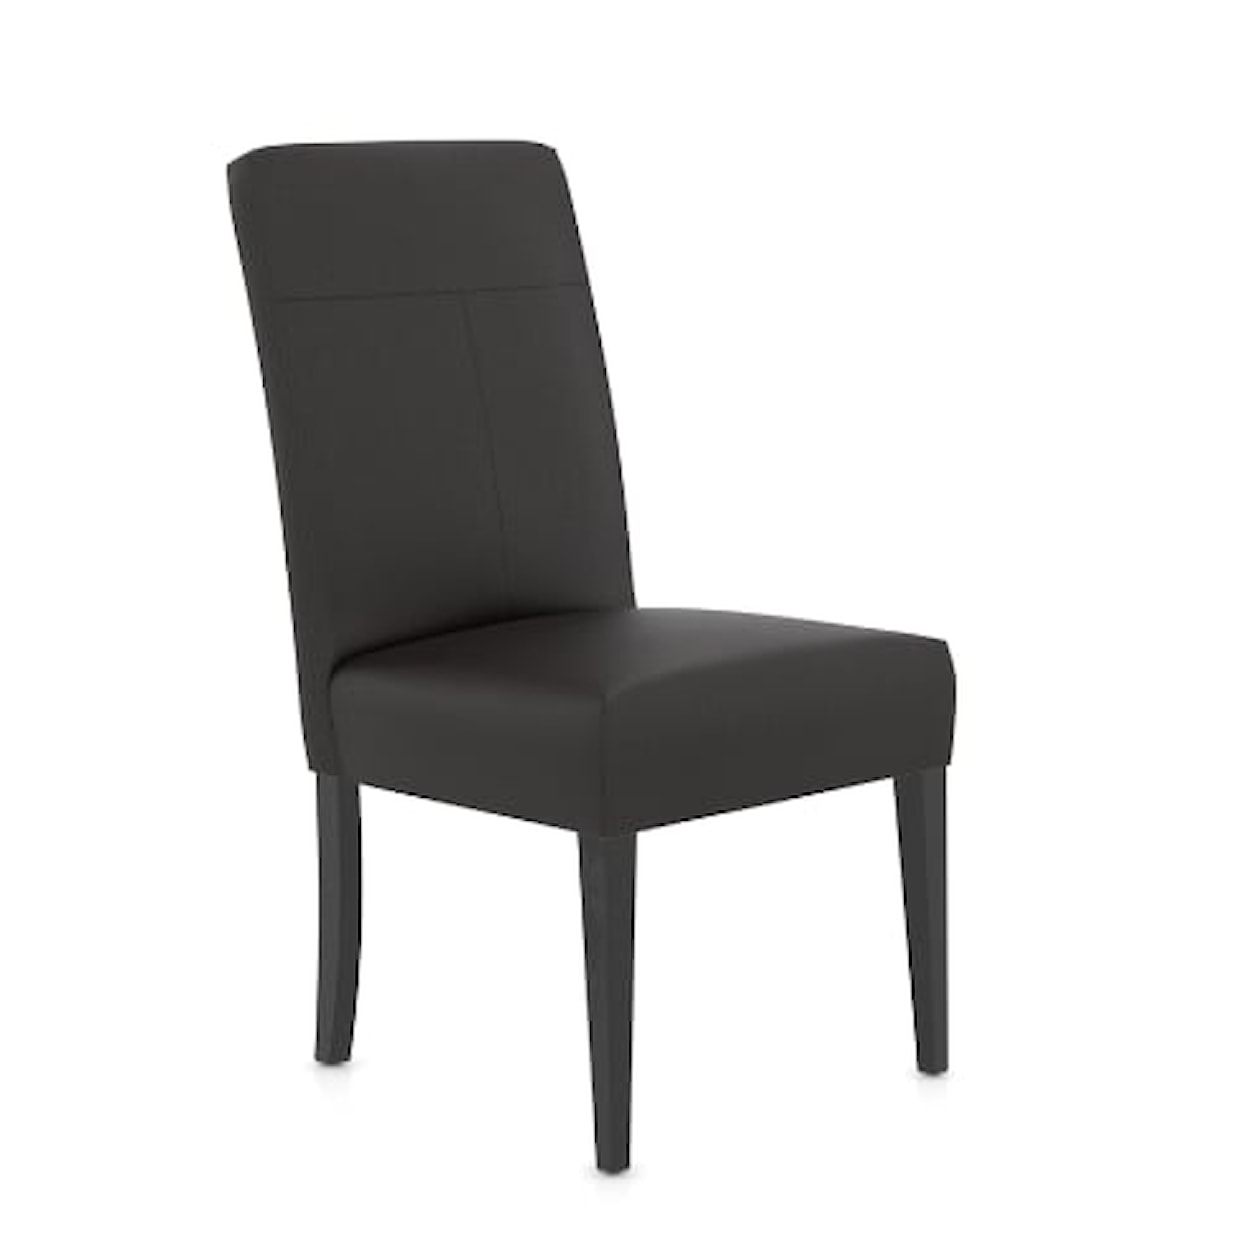 Canadel Loft Customizable Upholstered Side Chair